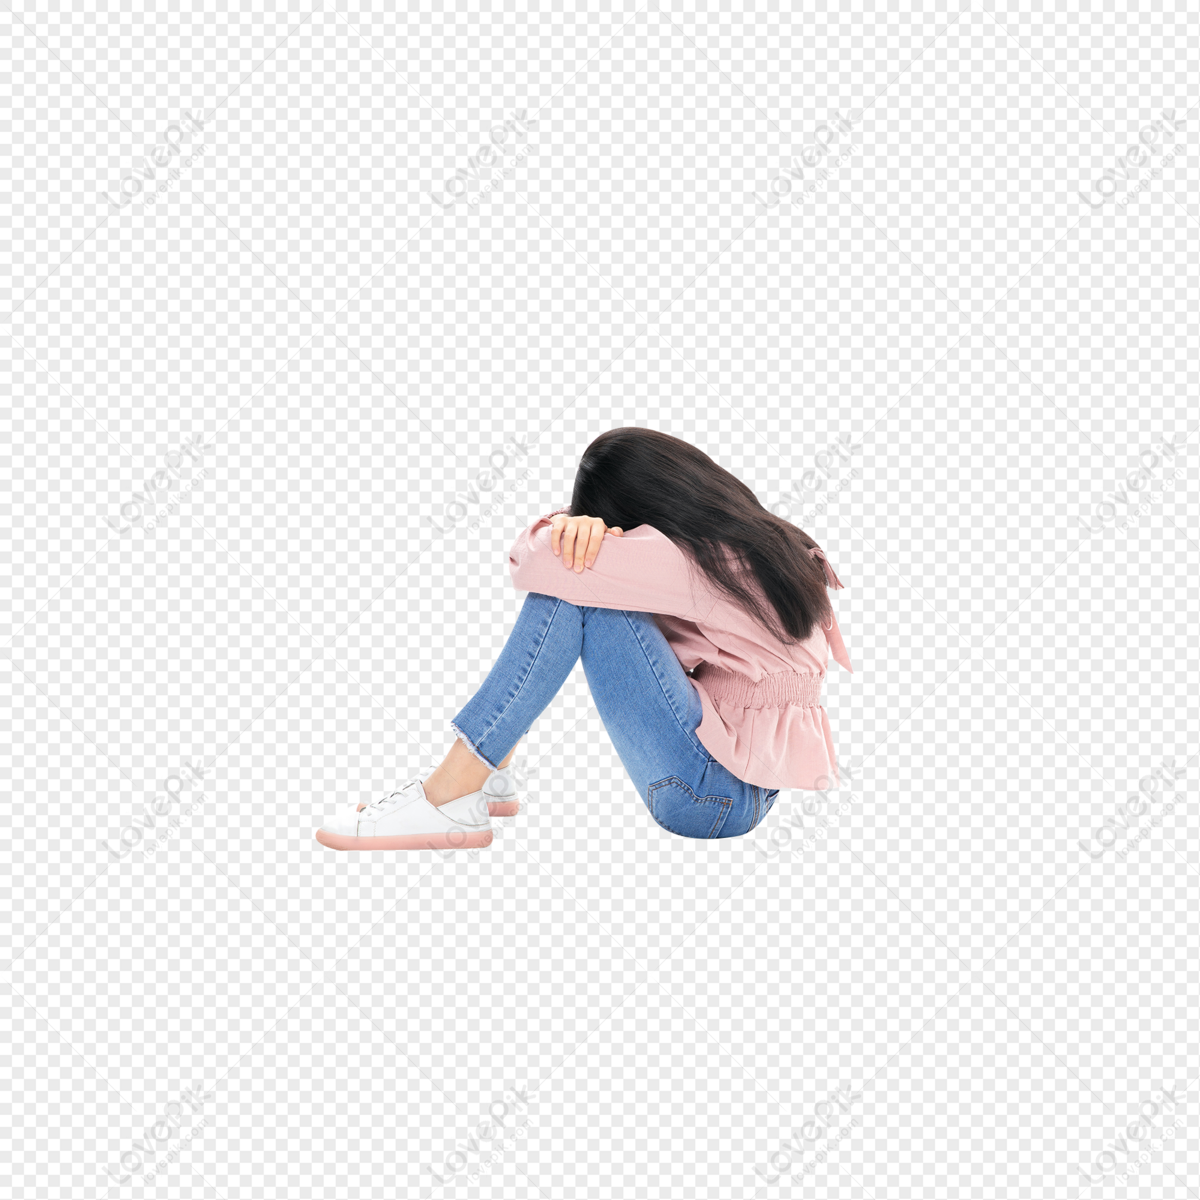 Sad Girl Sitting On The Ground Free PNG And Clipart Image For Free ...